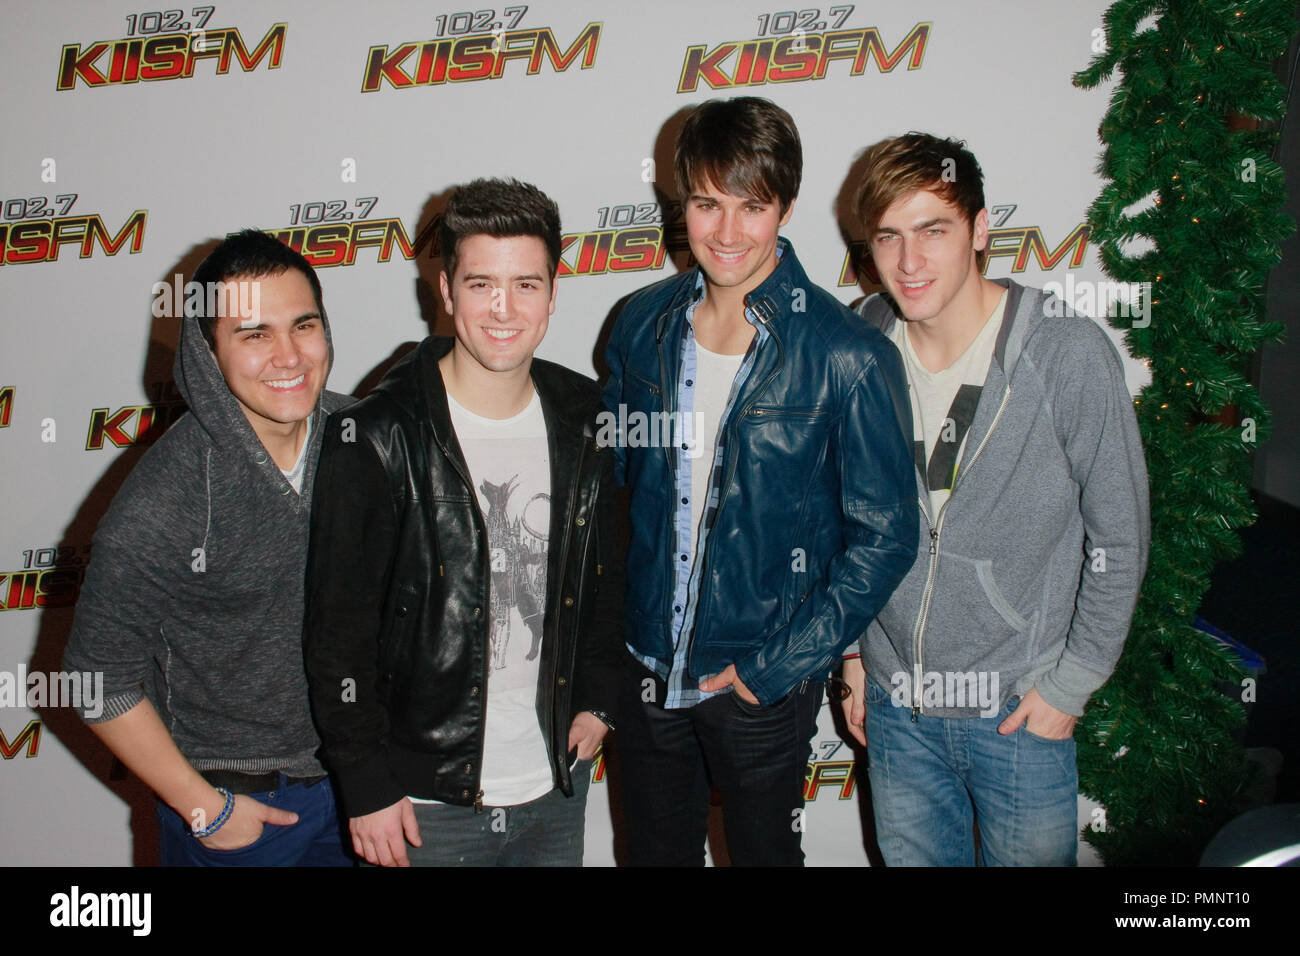 Kendall Schmidt, Carlos Pena, James Maslow, Logan Henderson (Big Time Rush) at Kiis FM's Jingle Ball 2011. Arrivals held at Nokia Theatre L.A. Live in Los Angeles, CA, December 3, 2011. Photo by Joe Martinez / PictureLux Stock Photo